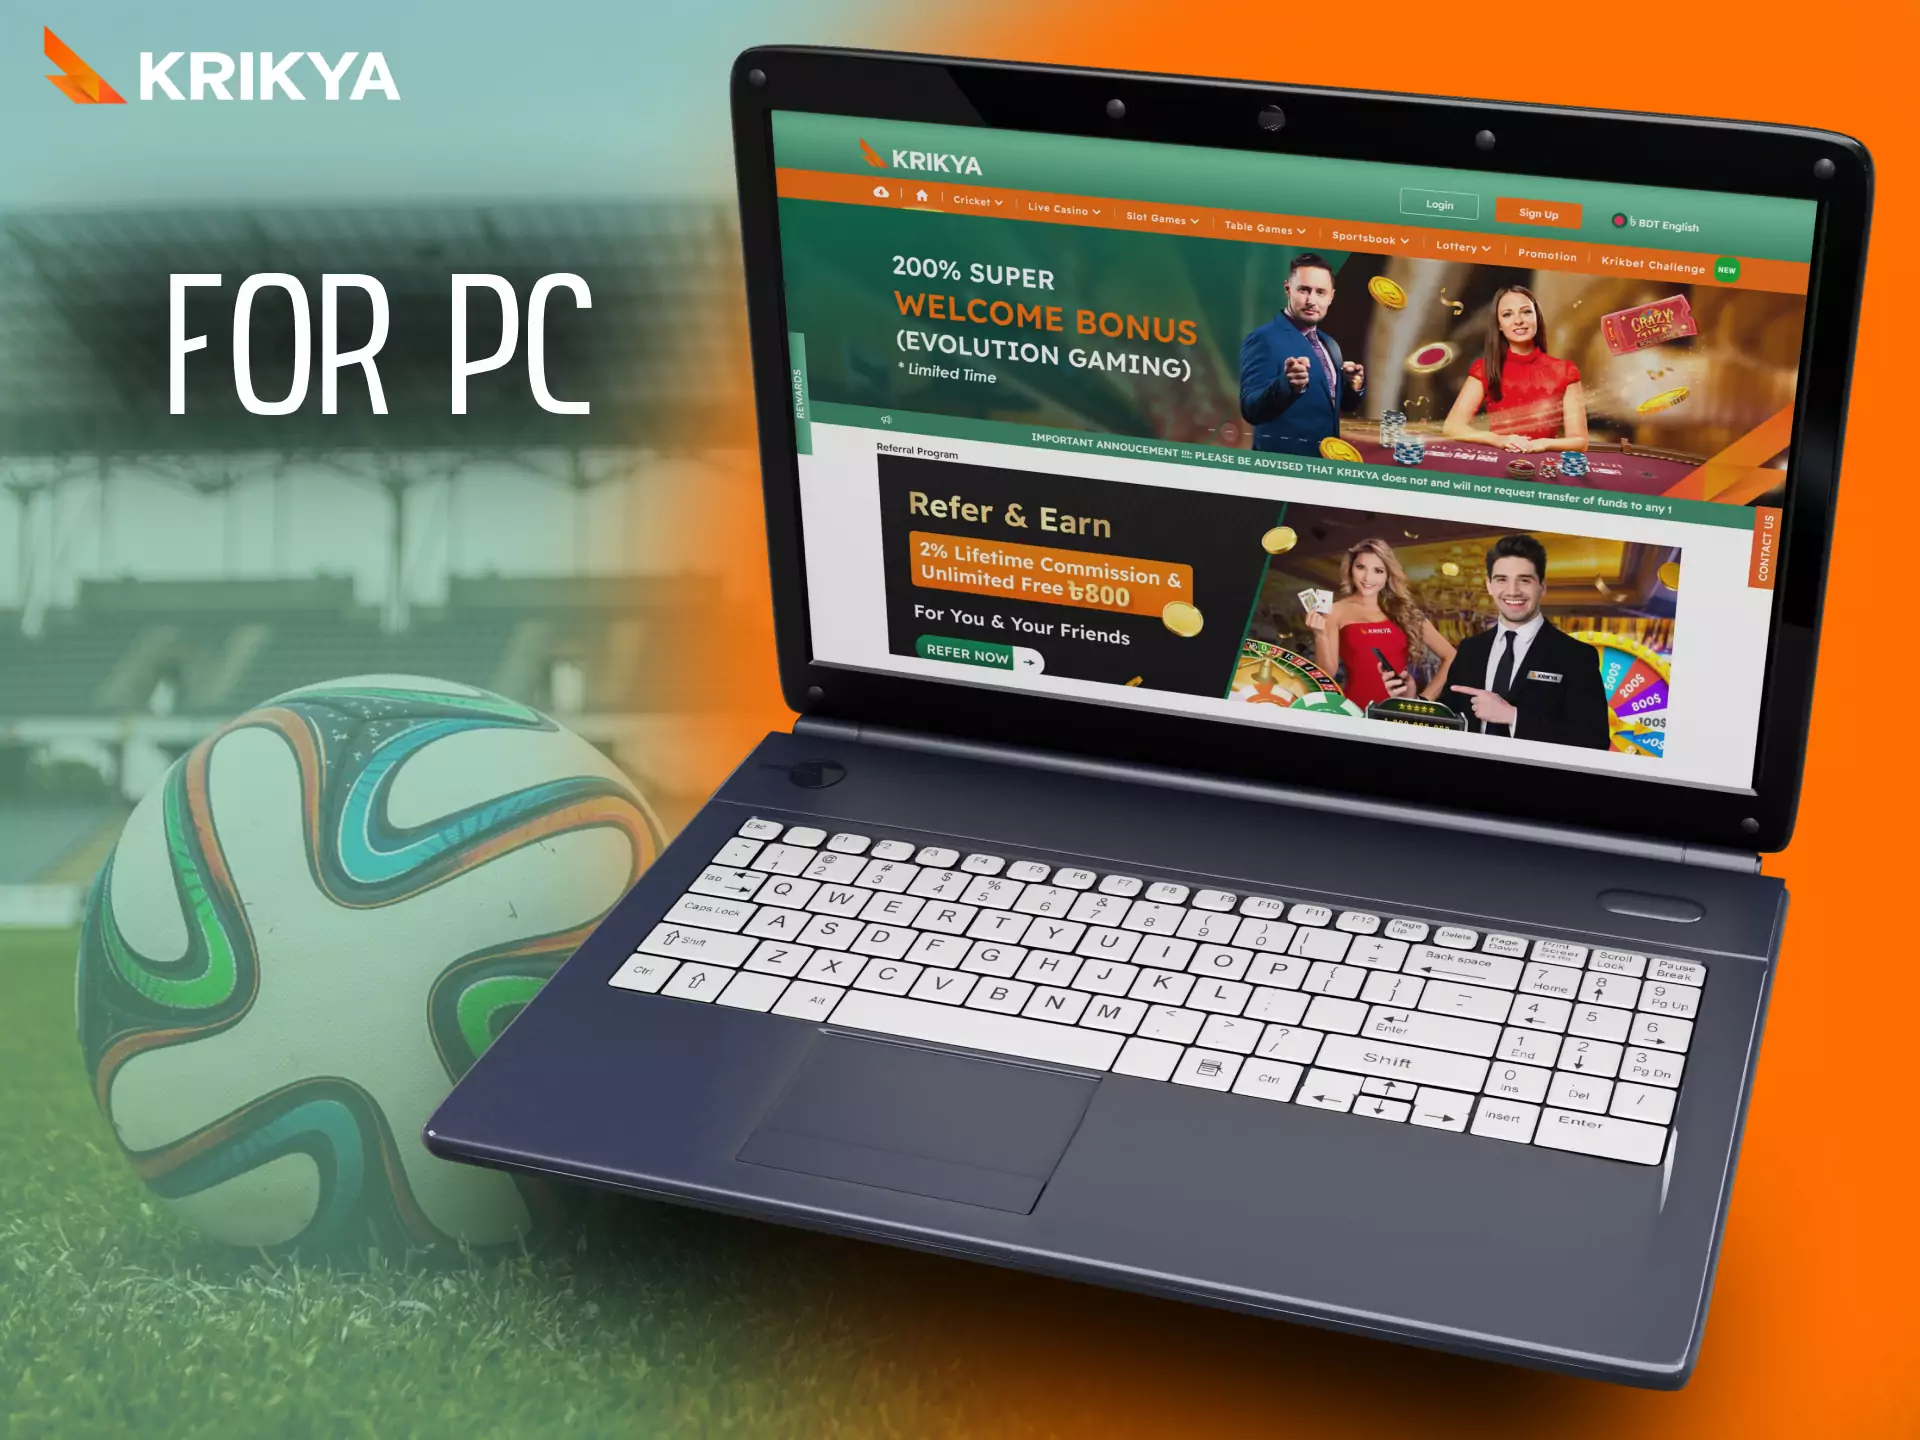 You can bet or gamble on your PC using the Krikya site.